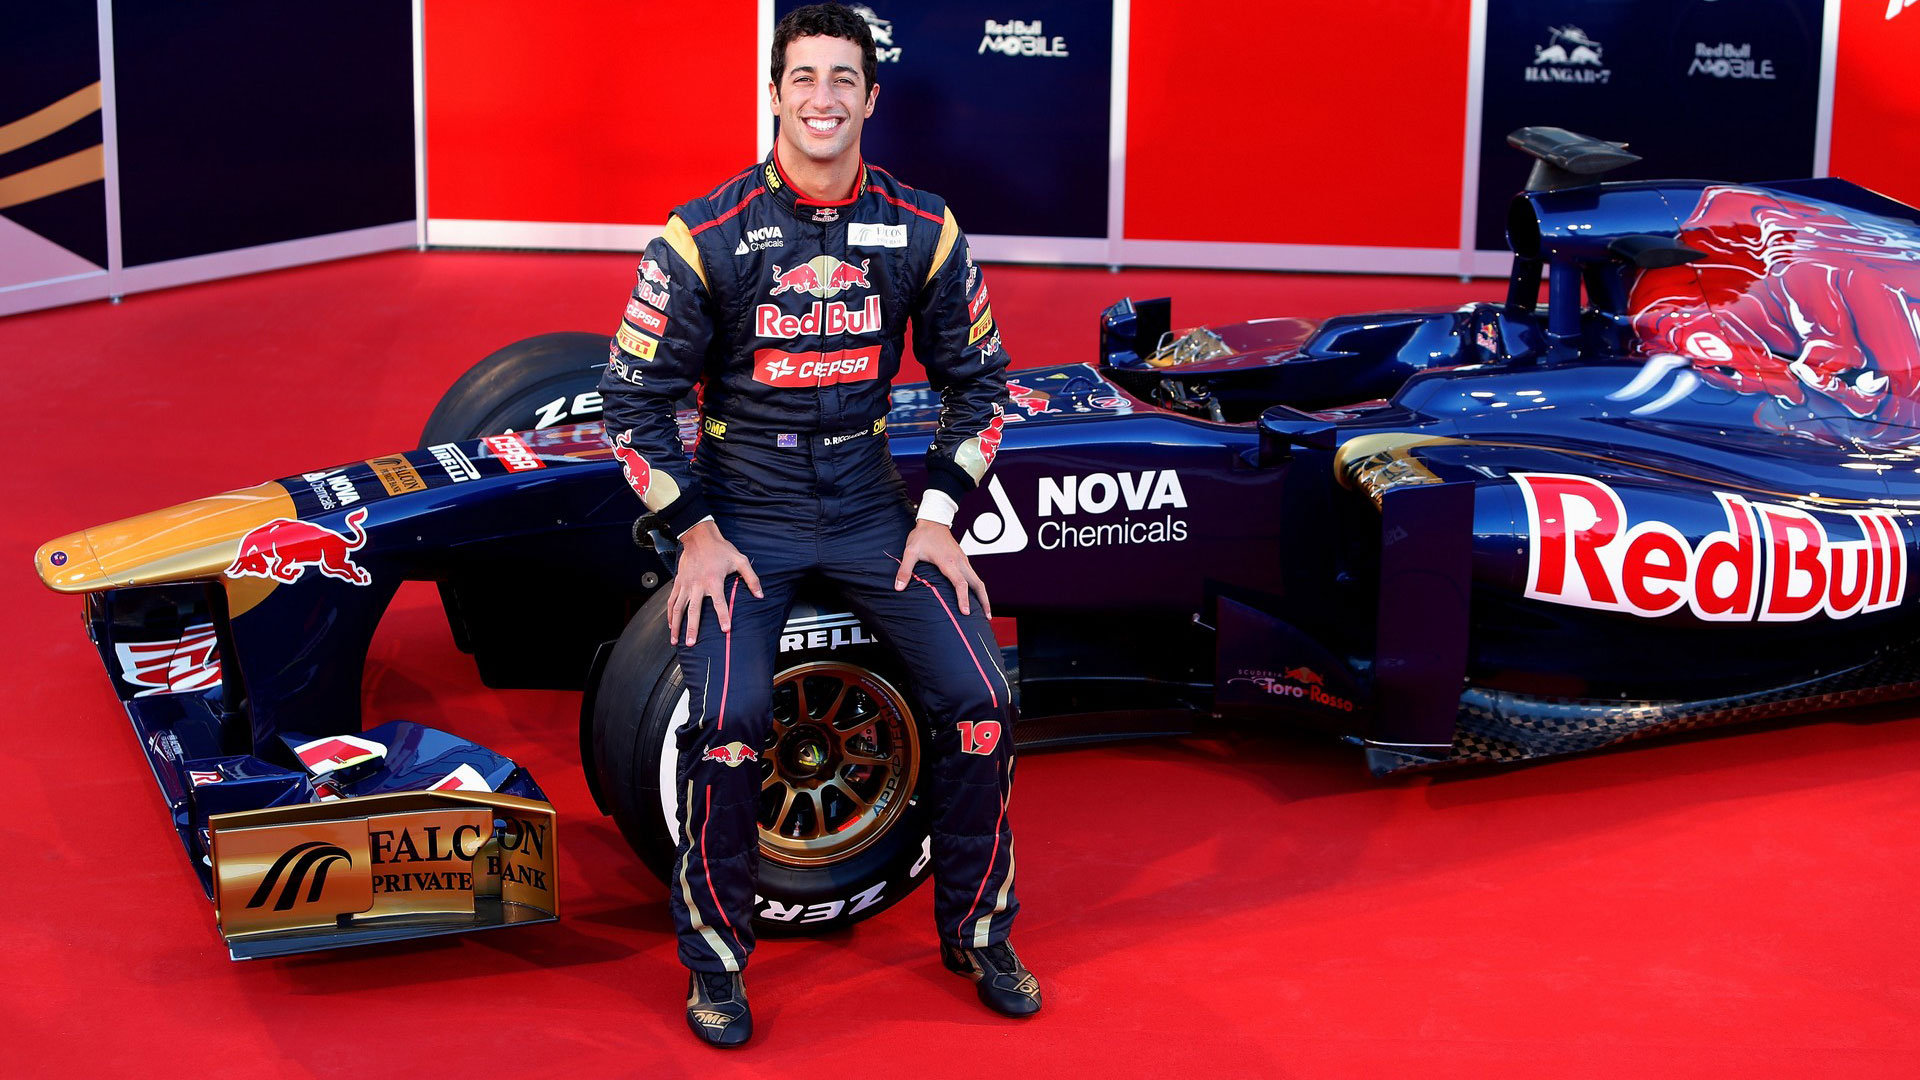 HD Pictures Launch Toro Rosso Str8 F1 Car